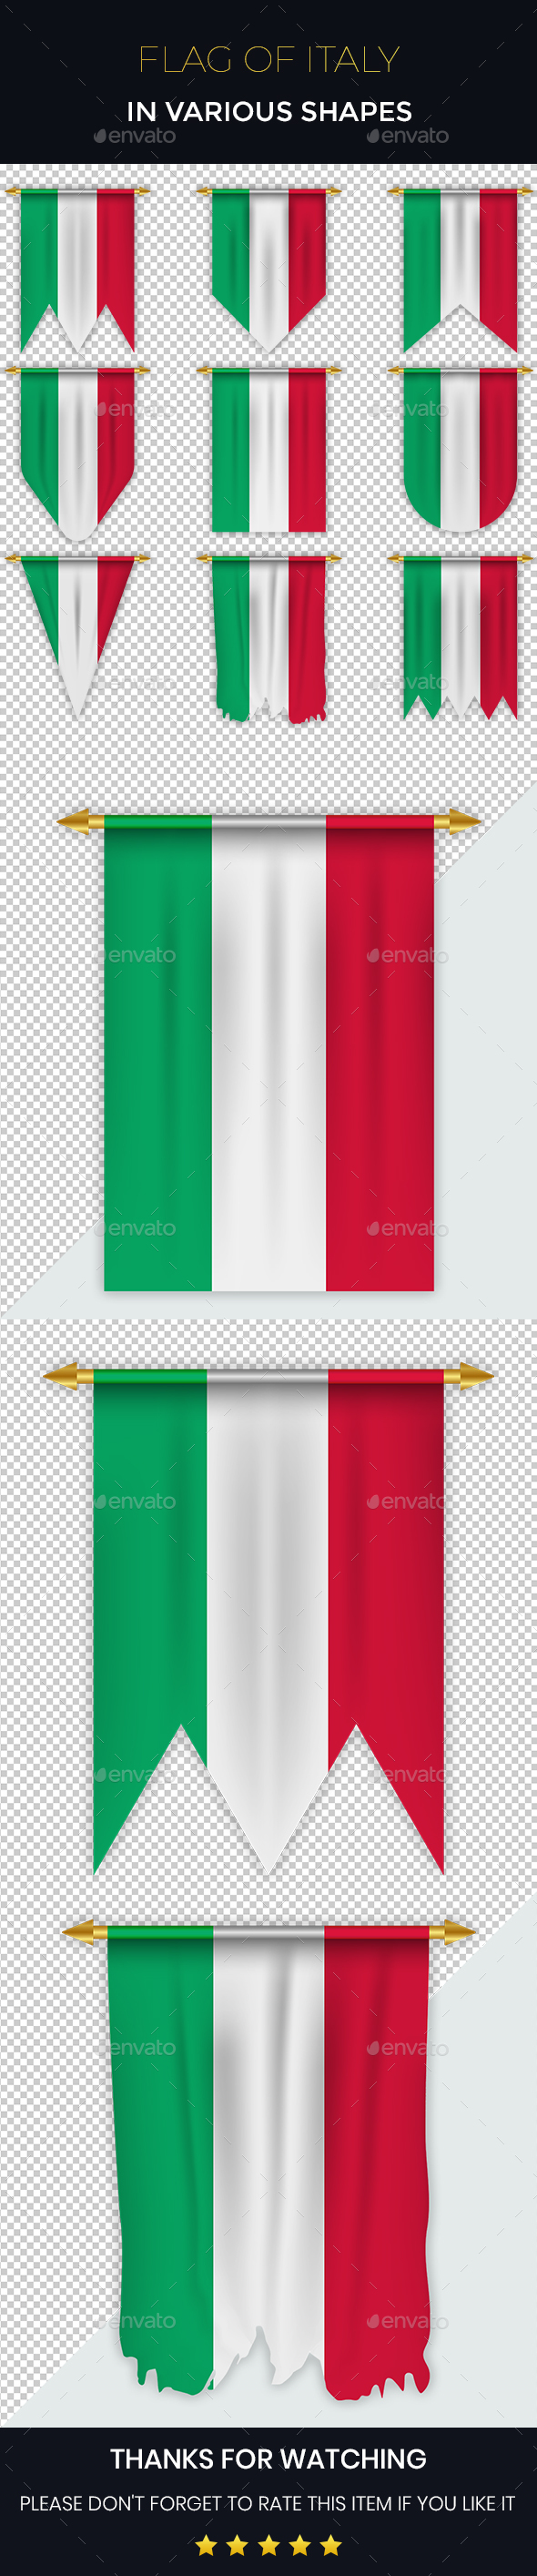 Italy Flag in Various Shapes